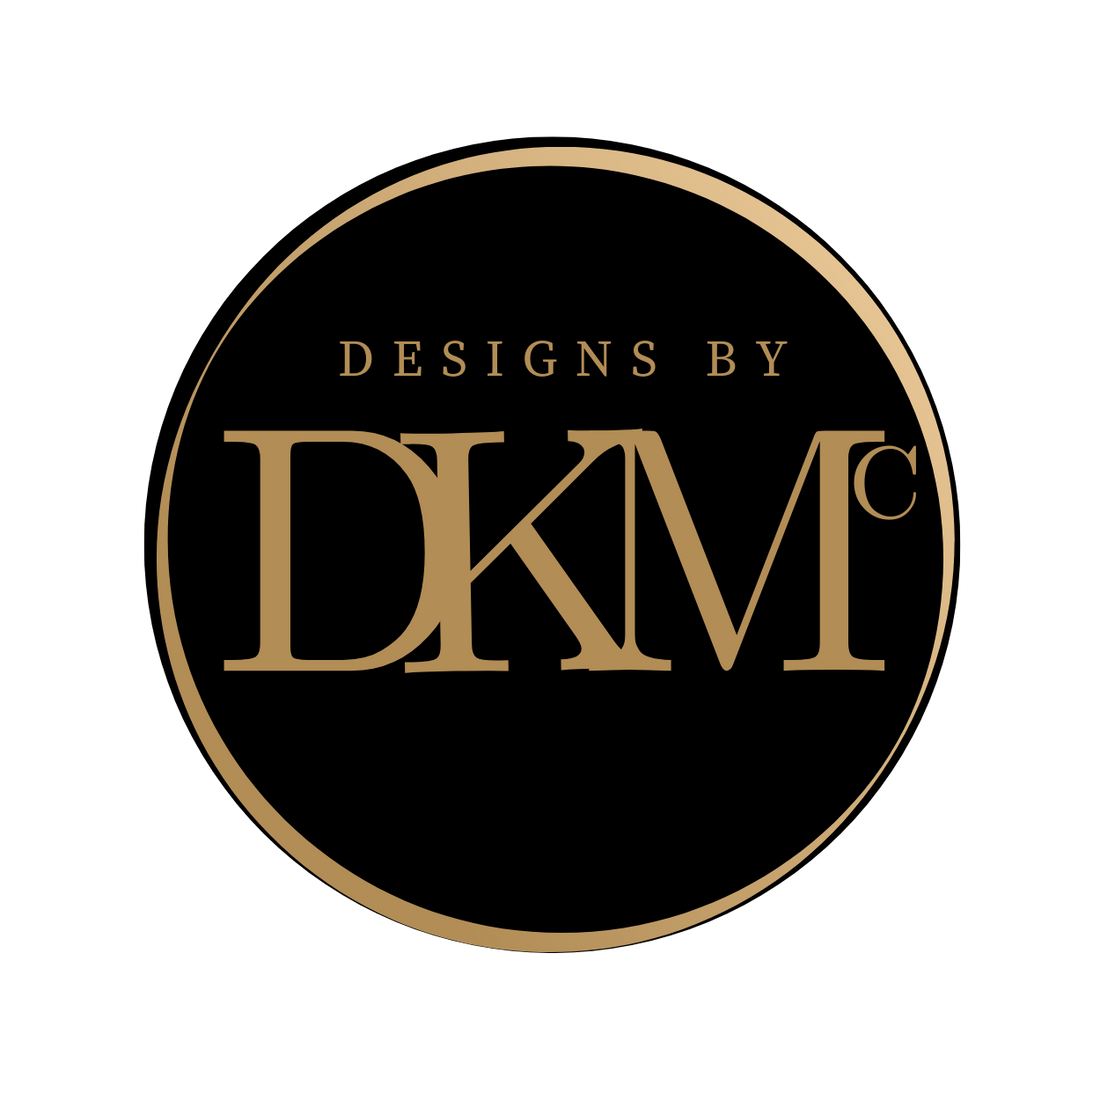 Designs by DKMc: Supporting Small Businesses, One Unique Design at a Time